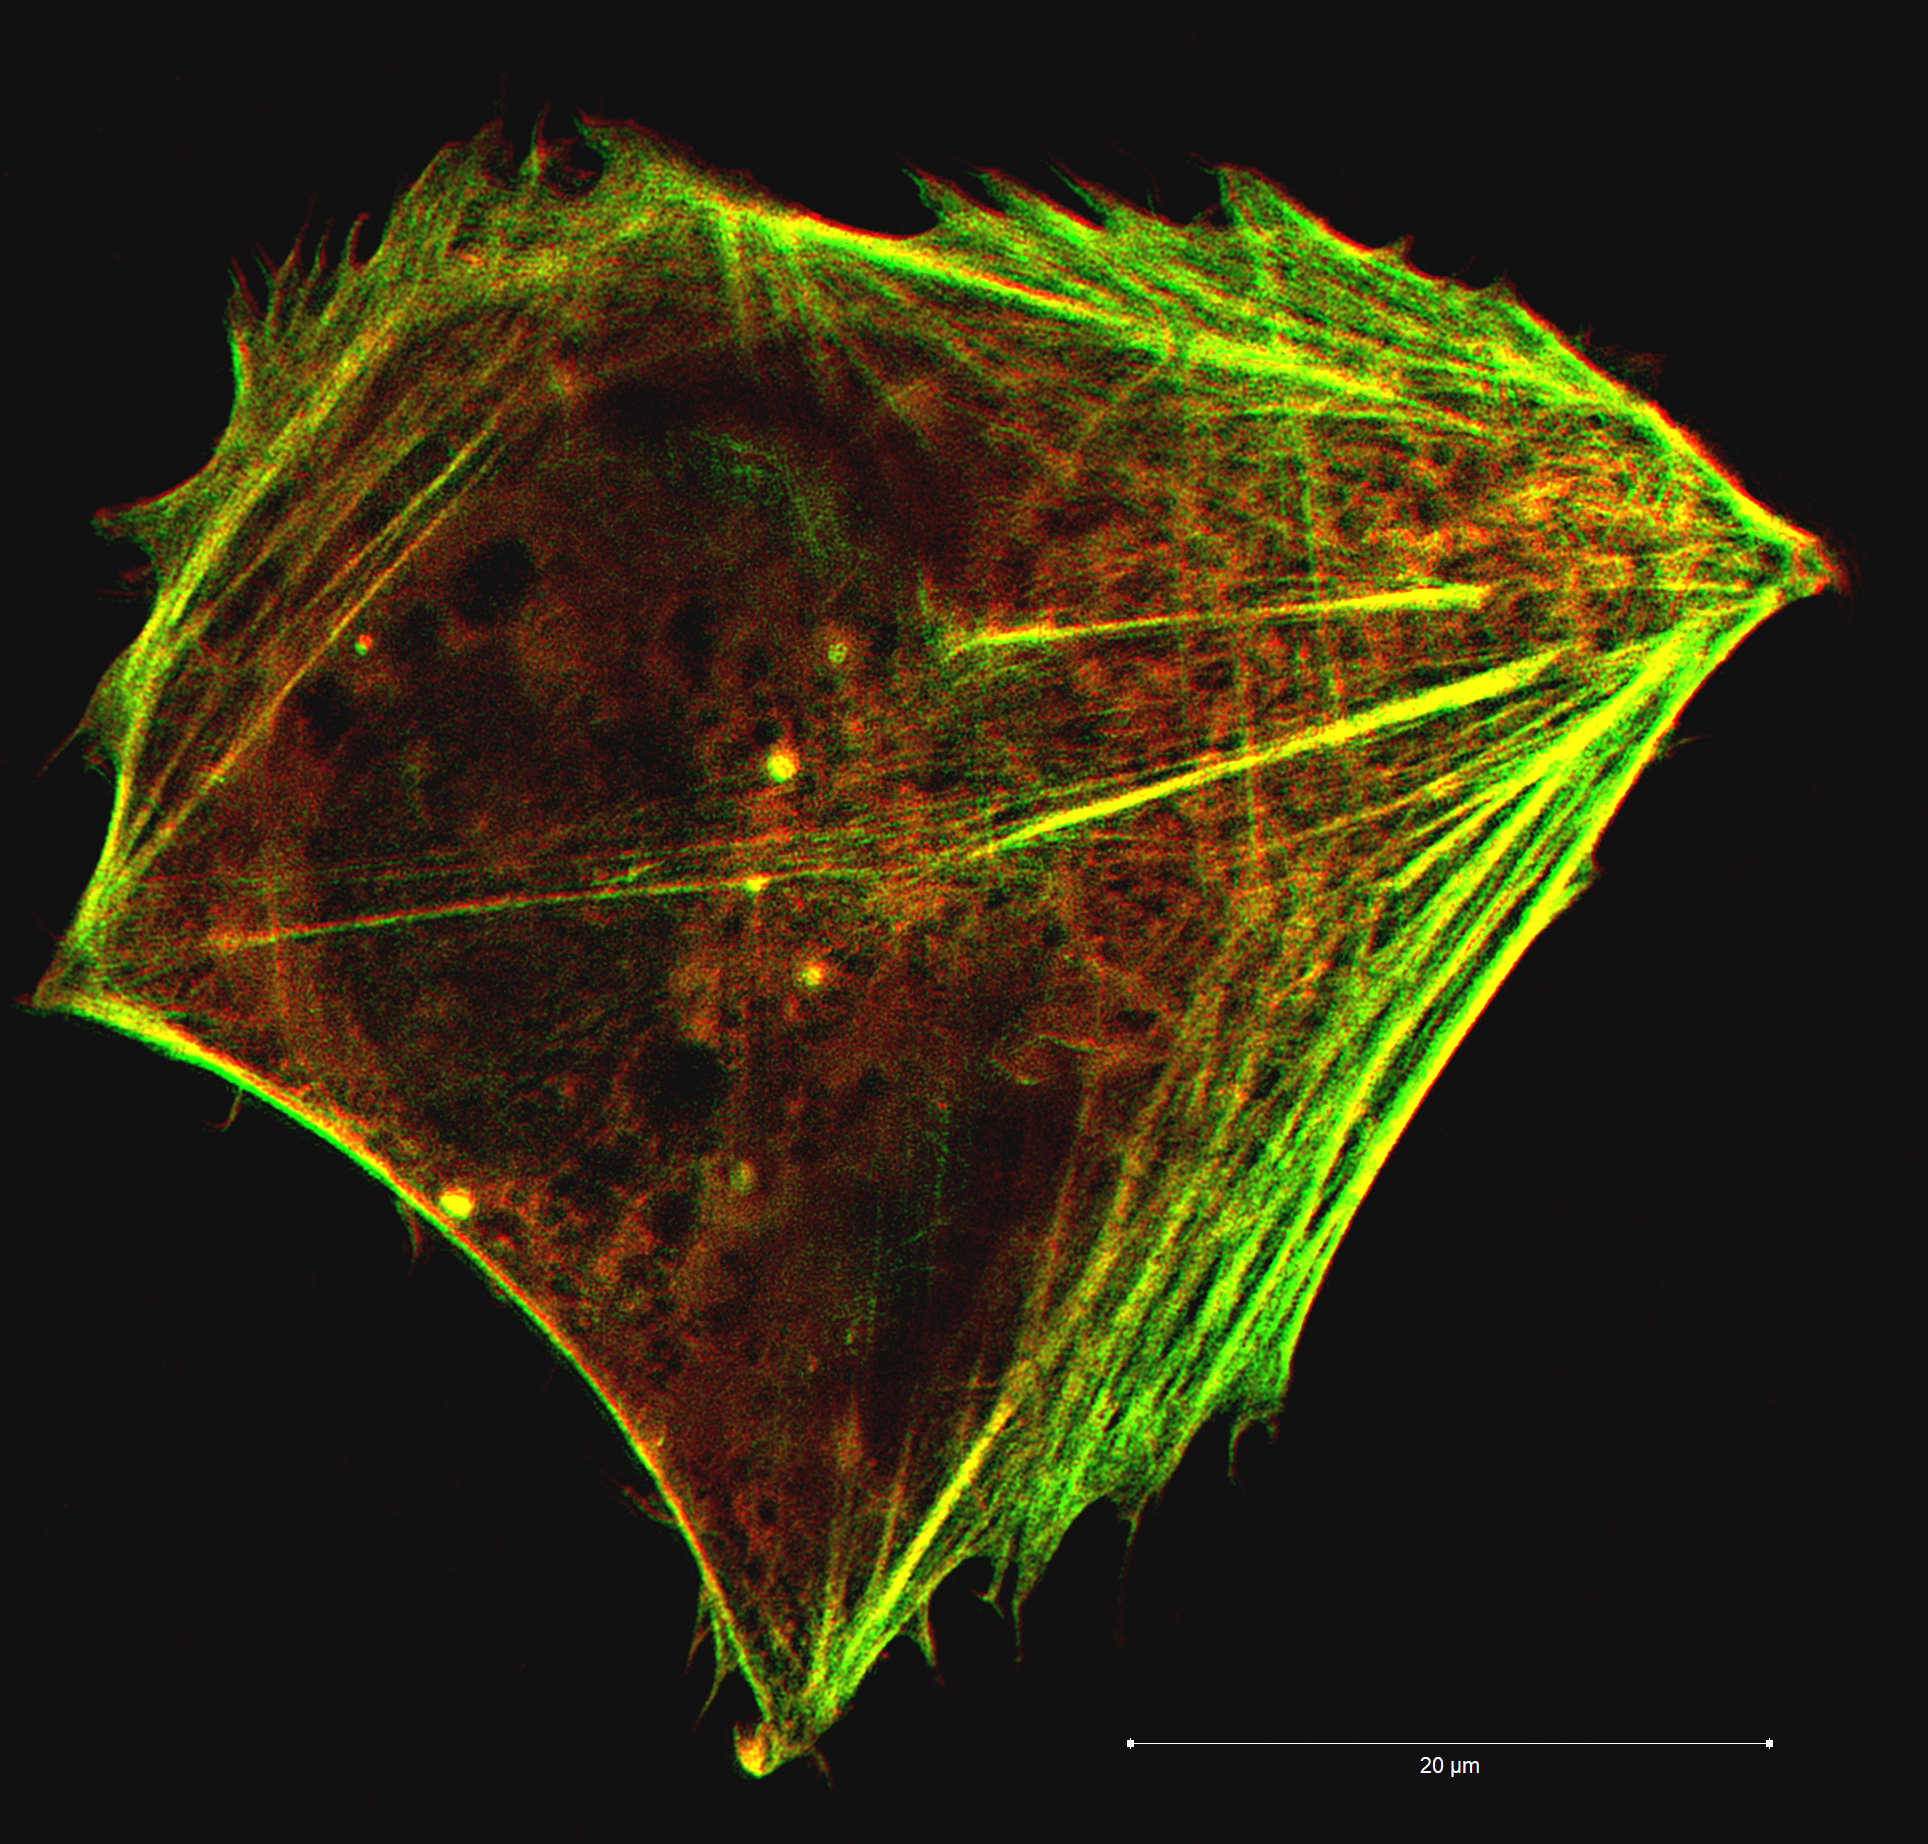 Thin filaments of the cells cytoskeleton